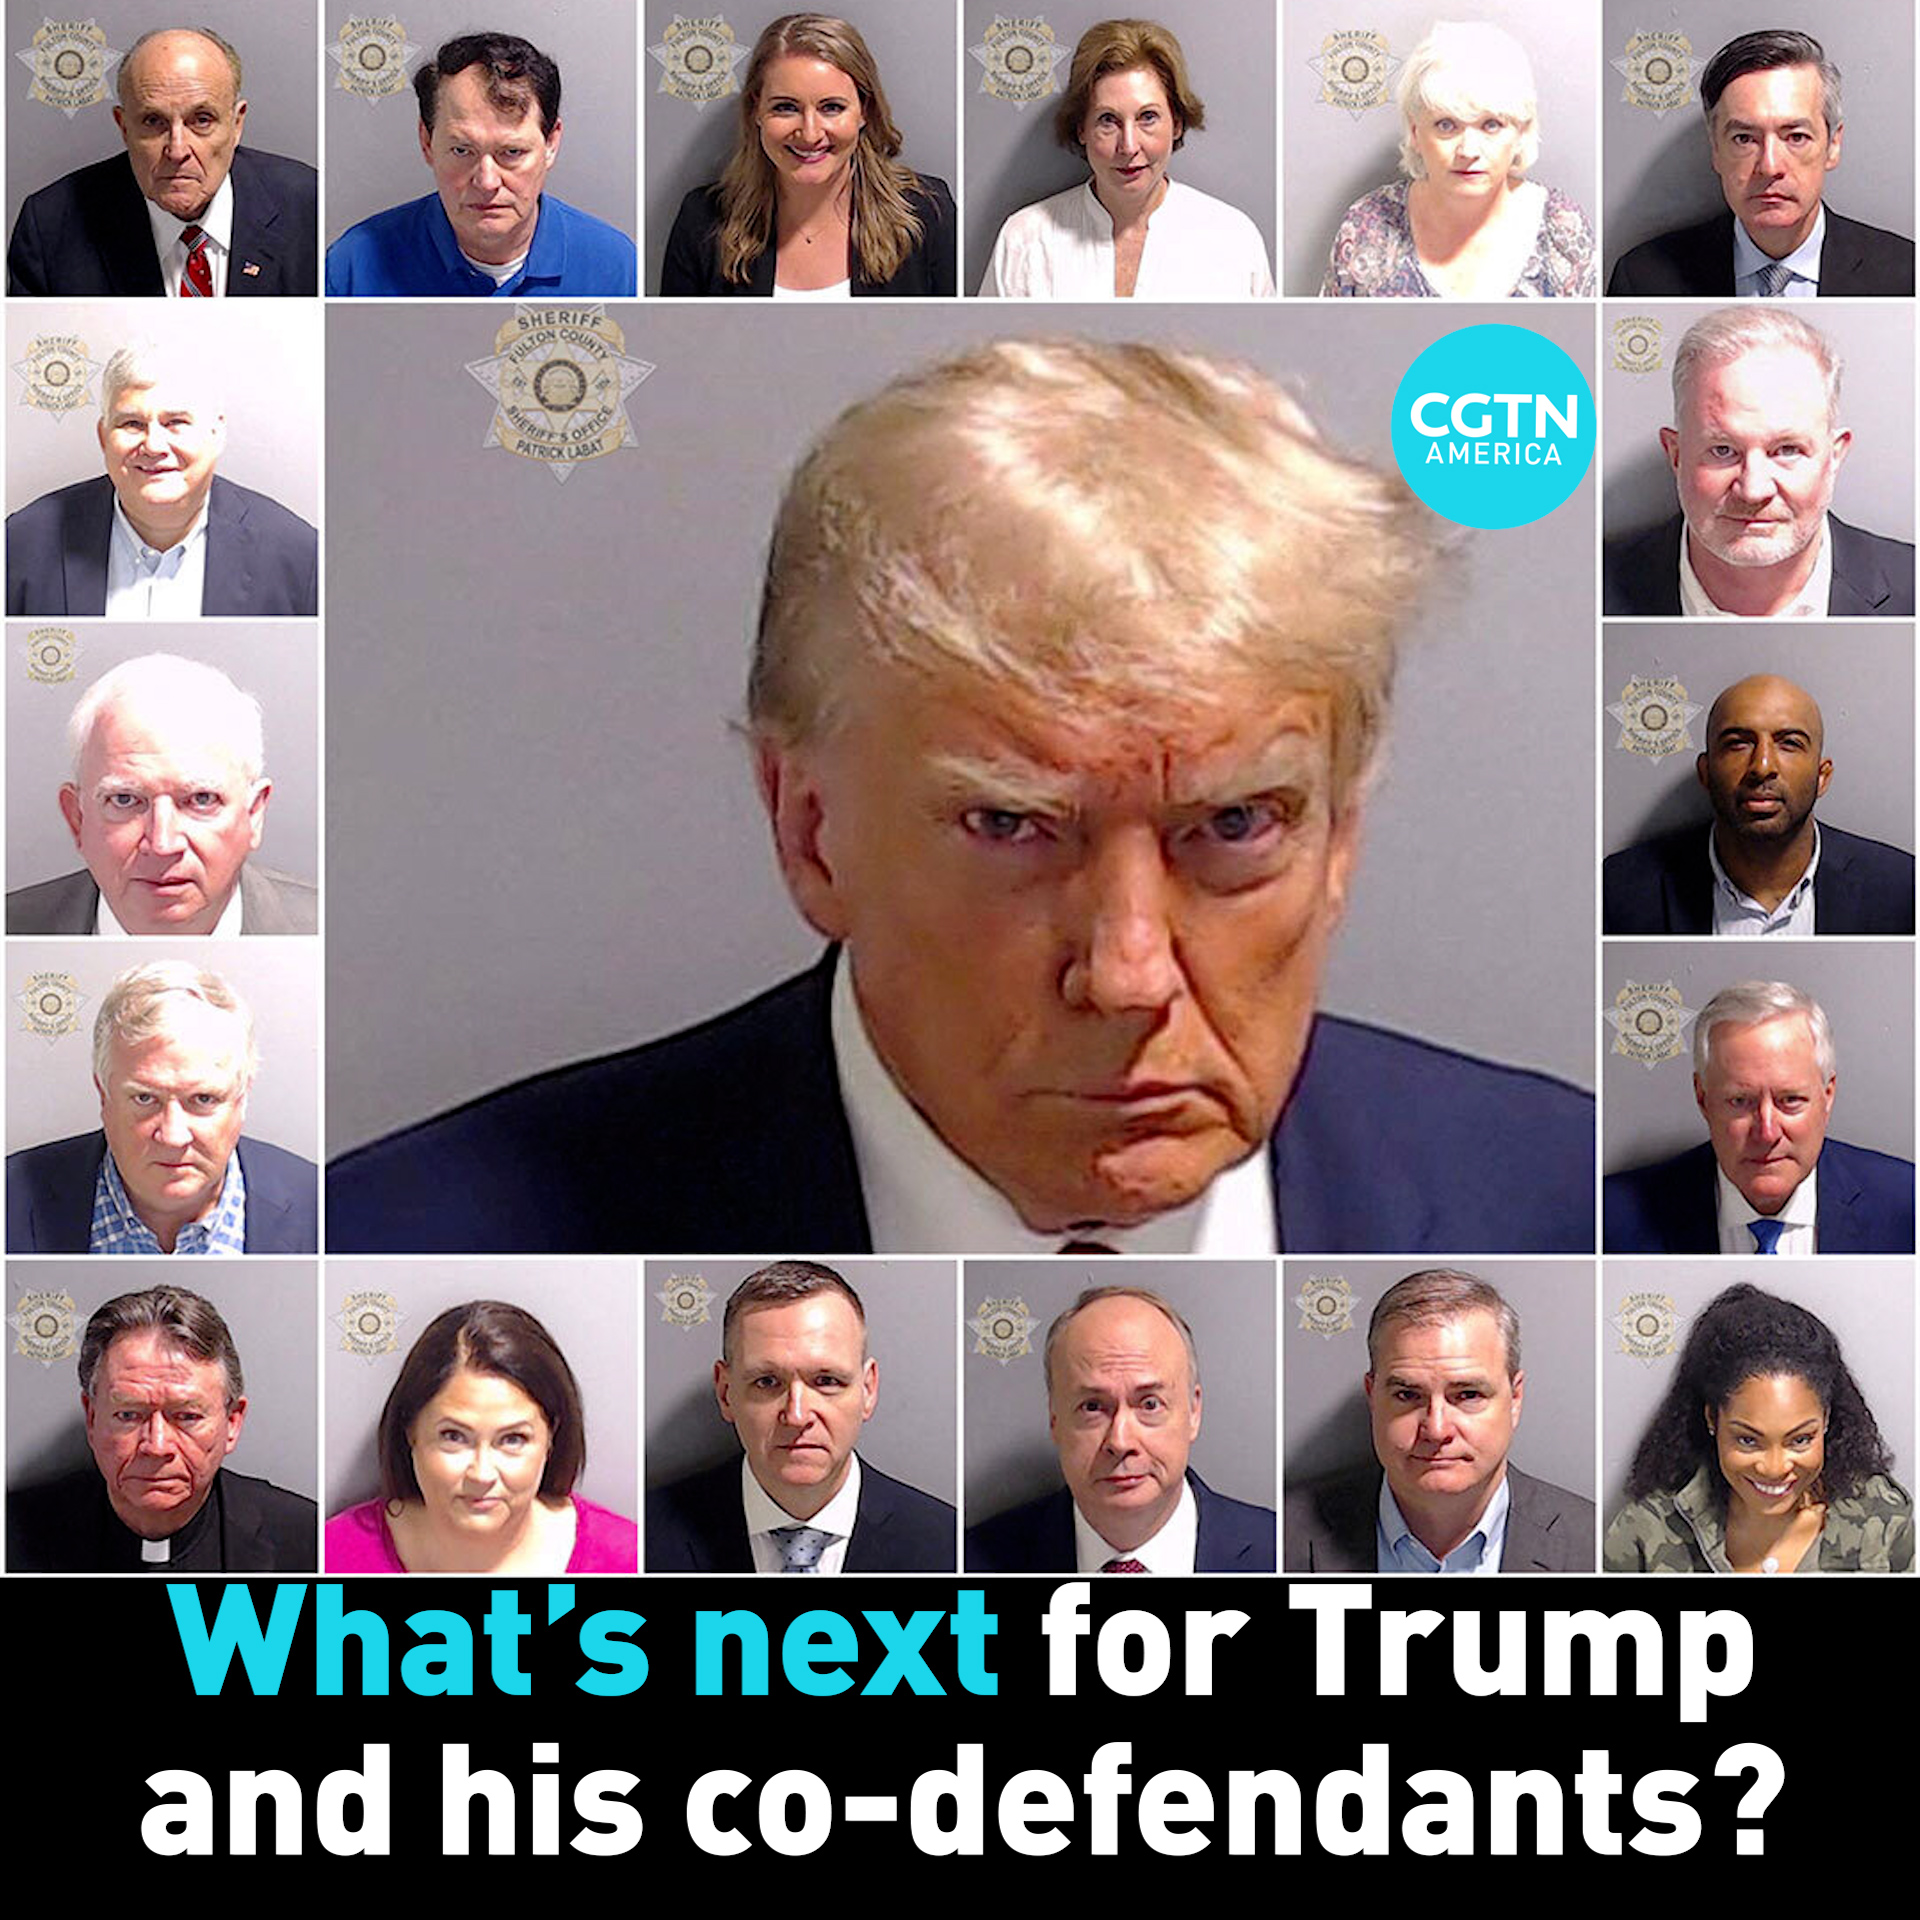 What's next for Trump and his co-defendants?